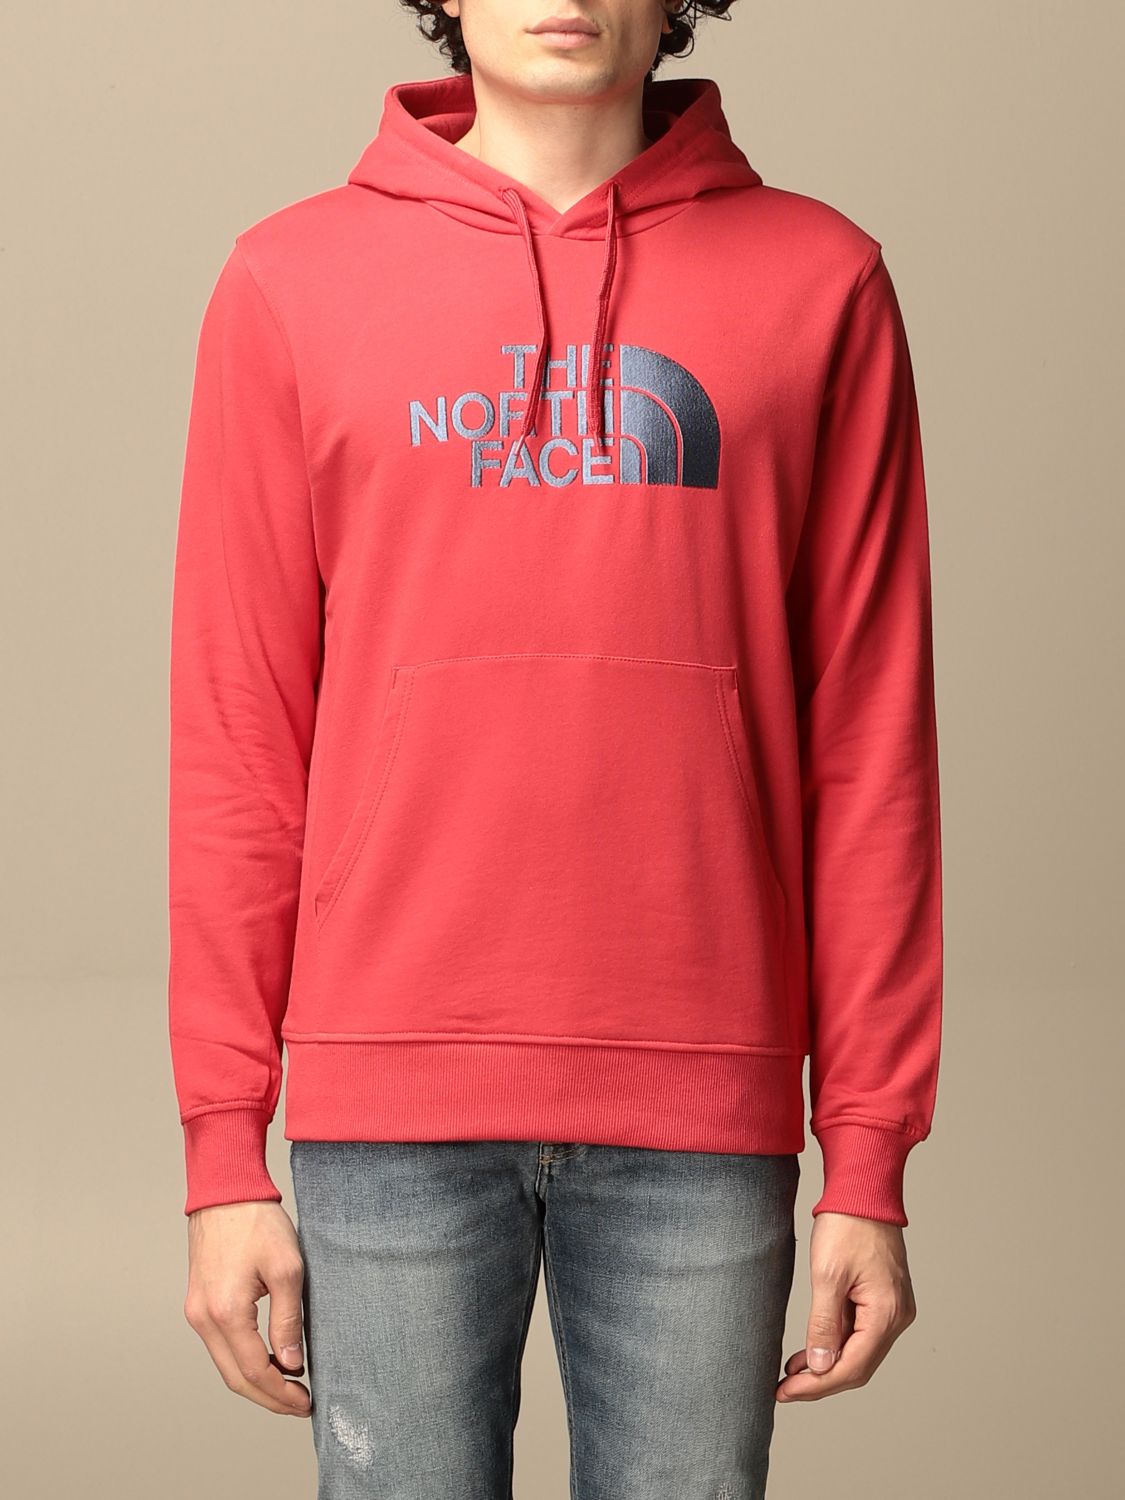 Sweatshirt The North Face: Sweatshirt homme The North Face rouge 1